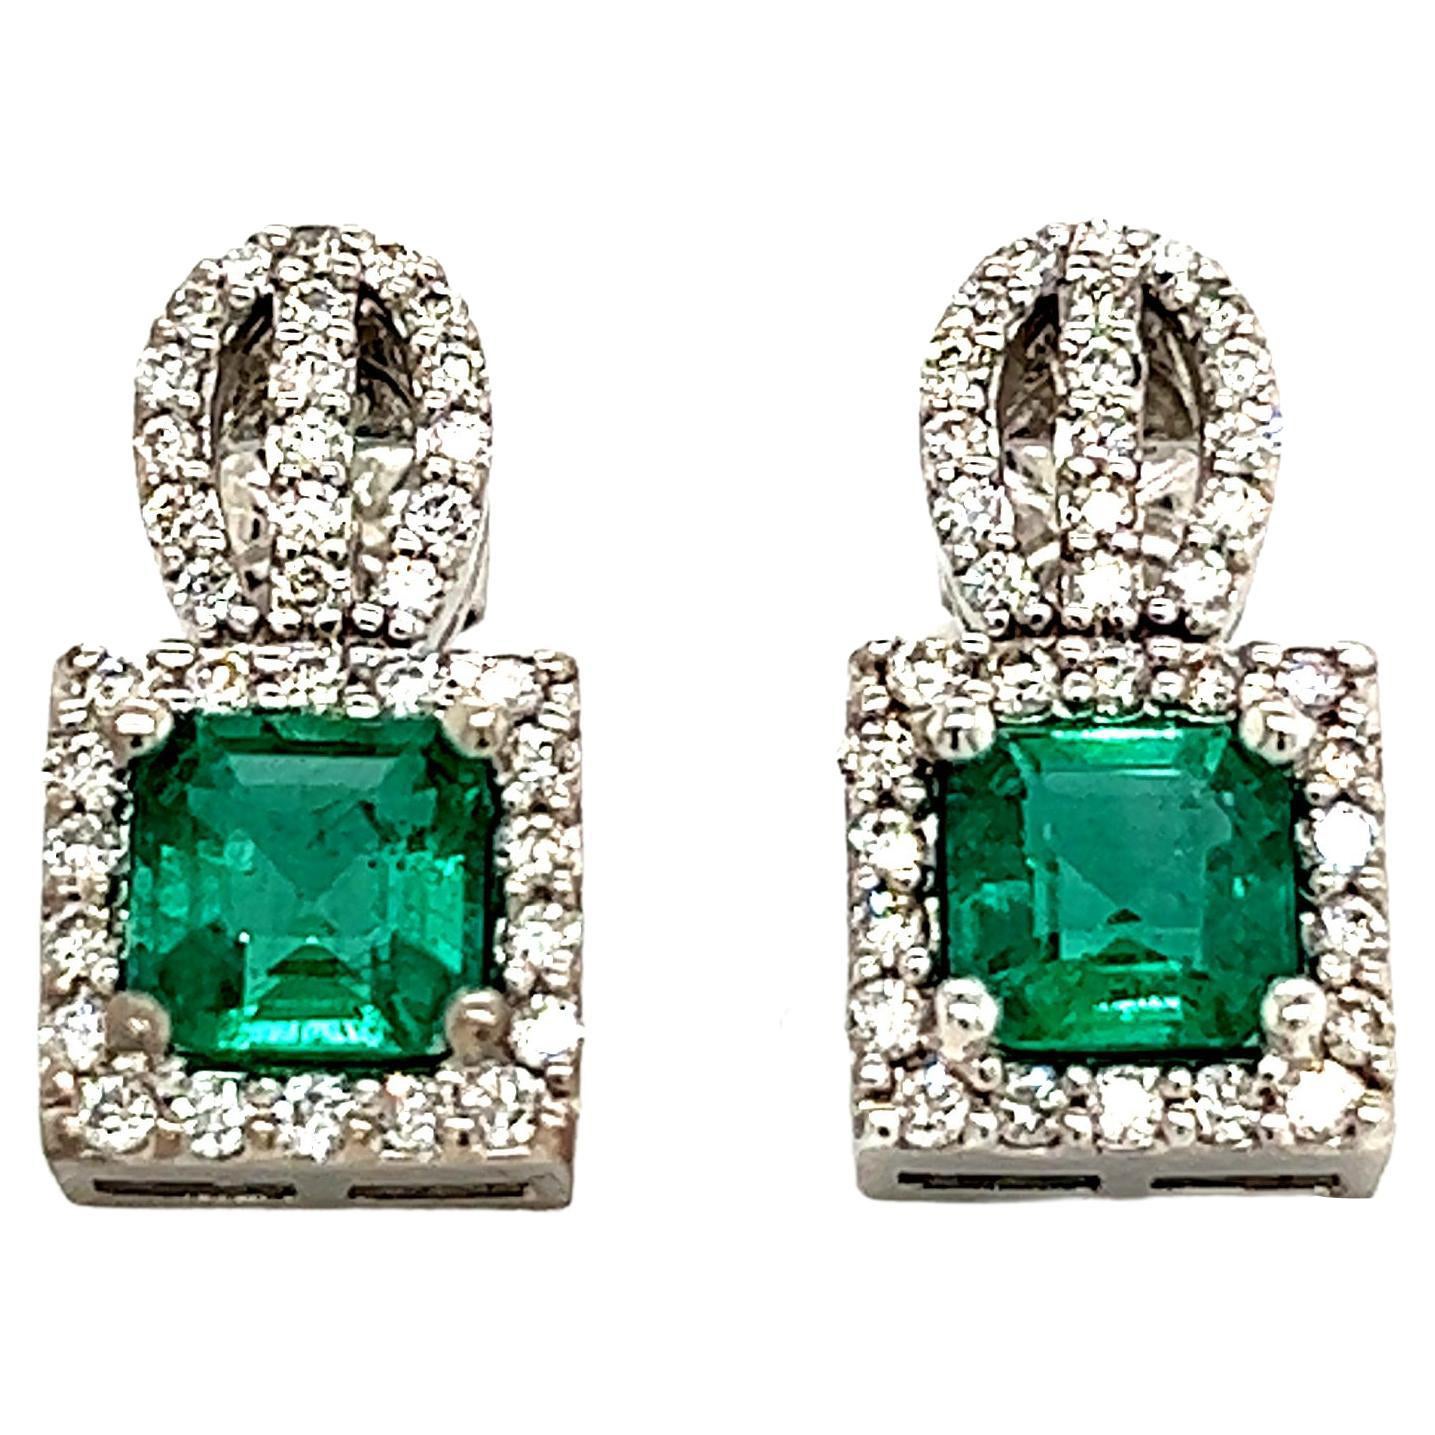 Natural Emerald Diamond Stud Earrings 14k Gold 2.84 TCW Certified For Sale